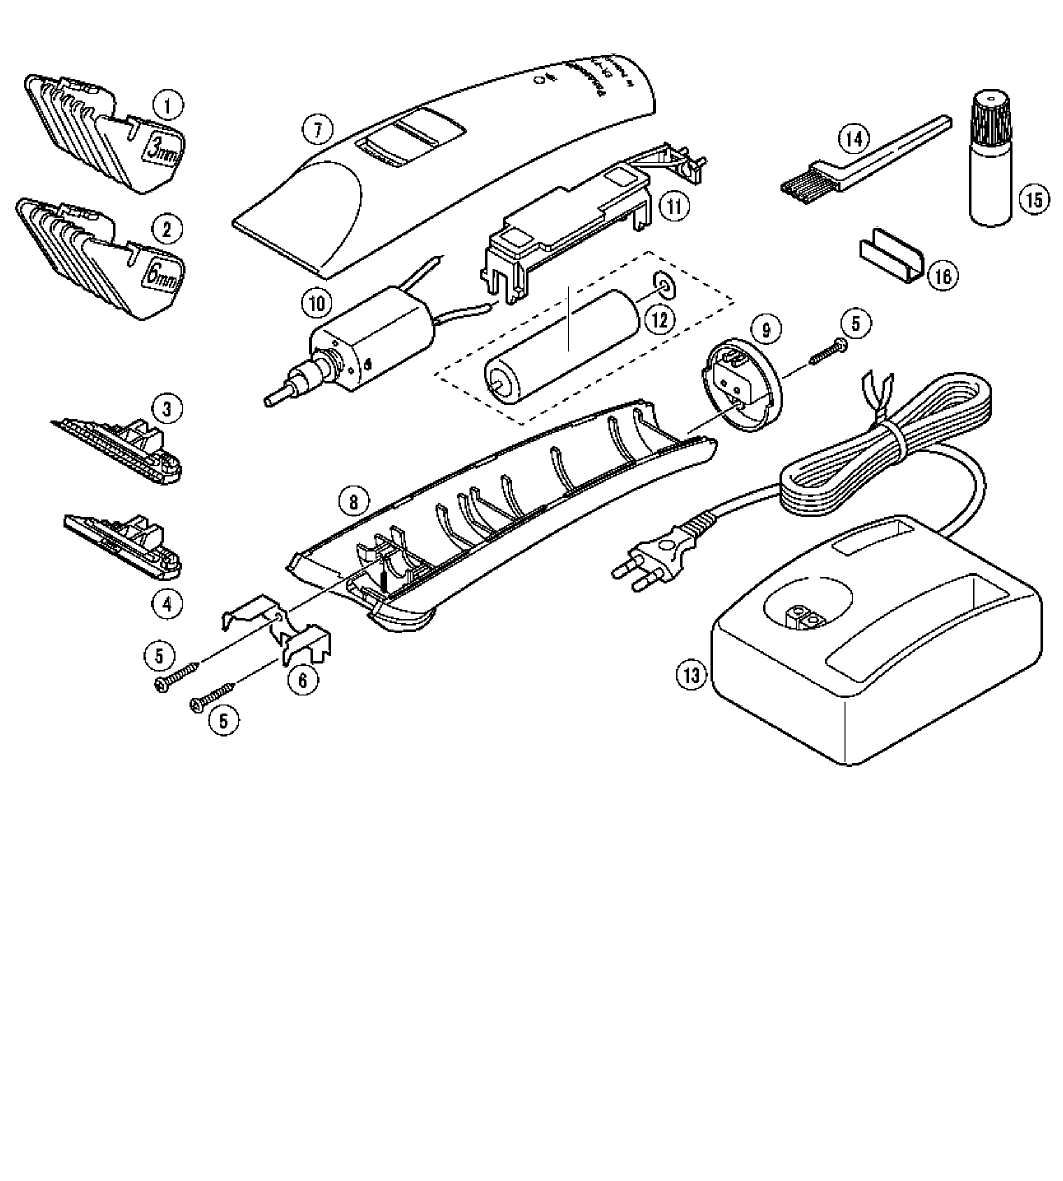 ER-PA11: Exploded View